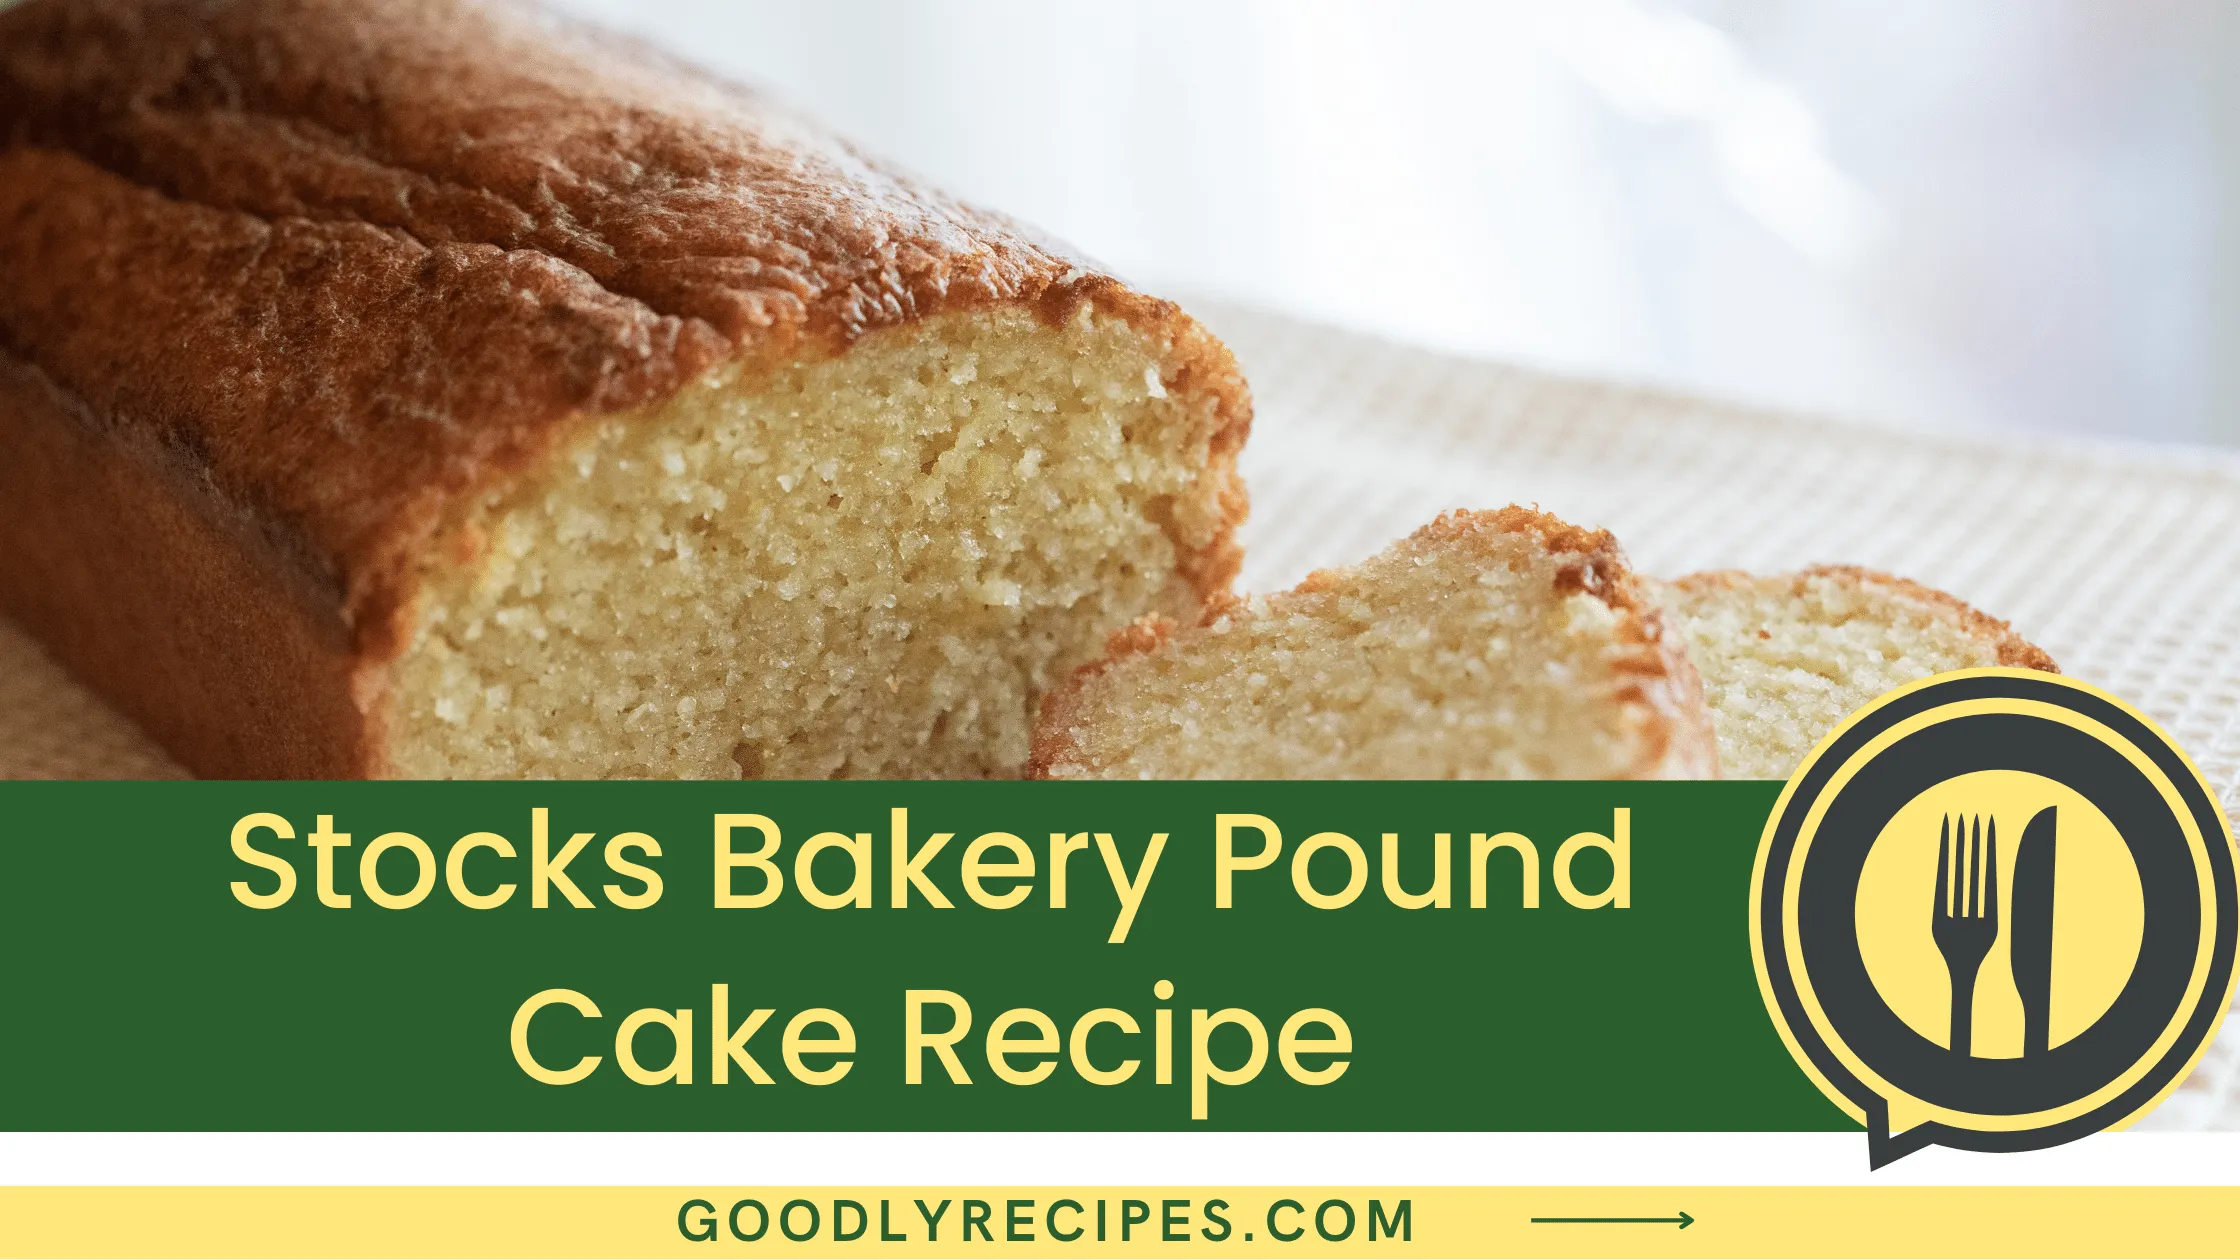 Stocks Bakery Pound Cake Recipe - For Food Lovers